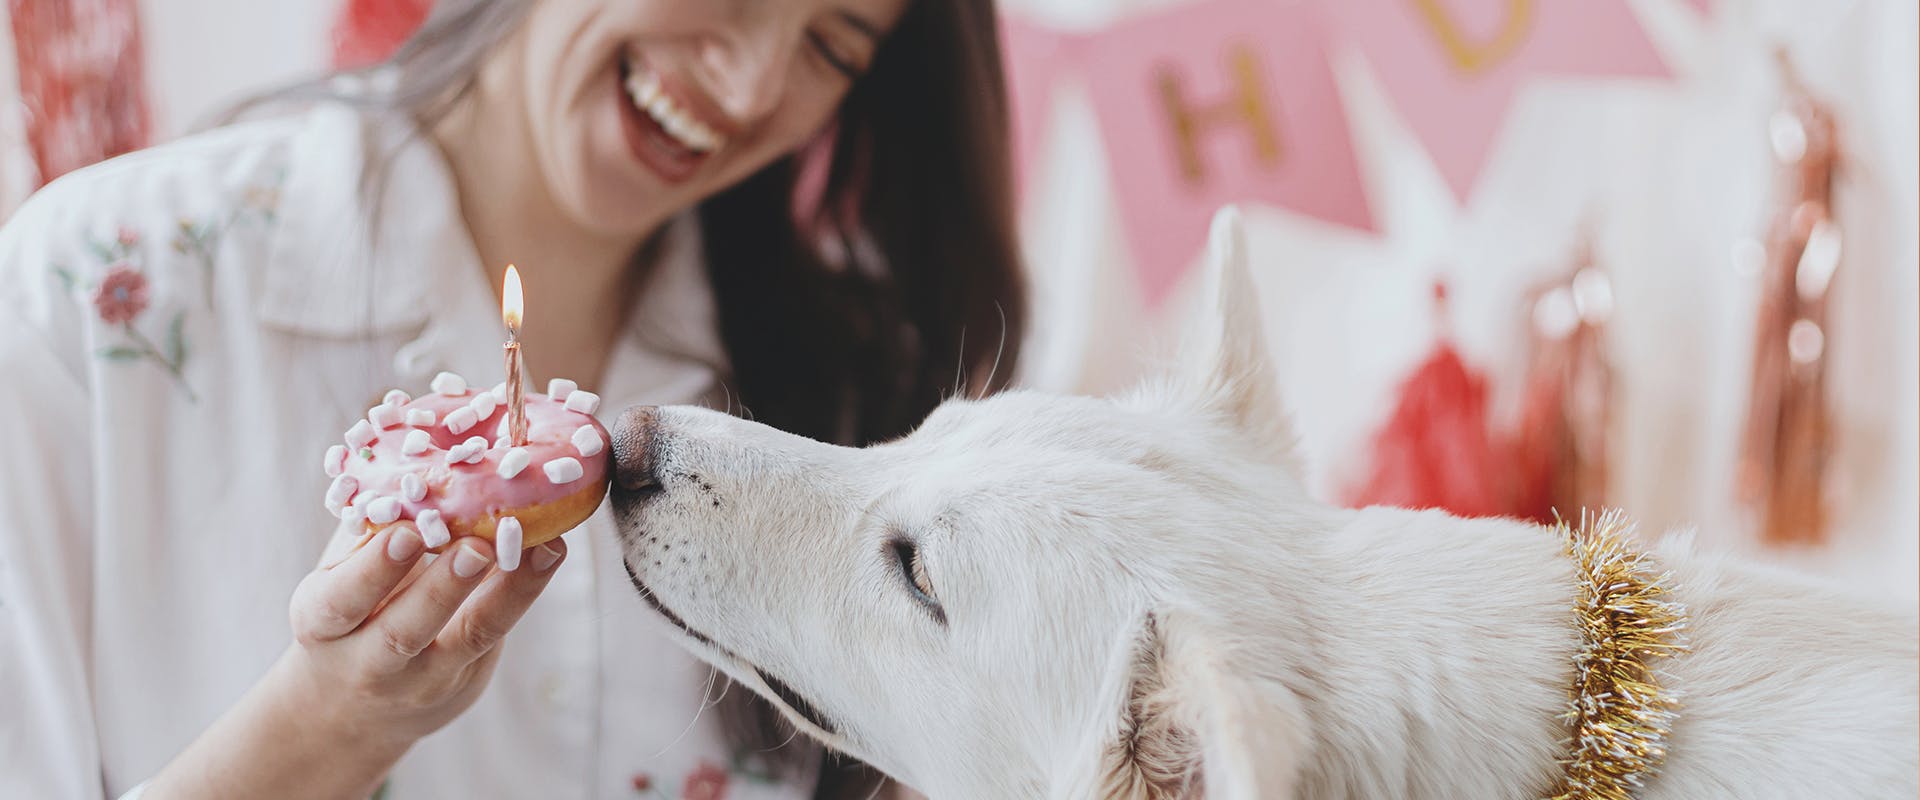 A woman feeding a dog a pink dog treat with a candle in it